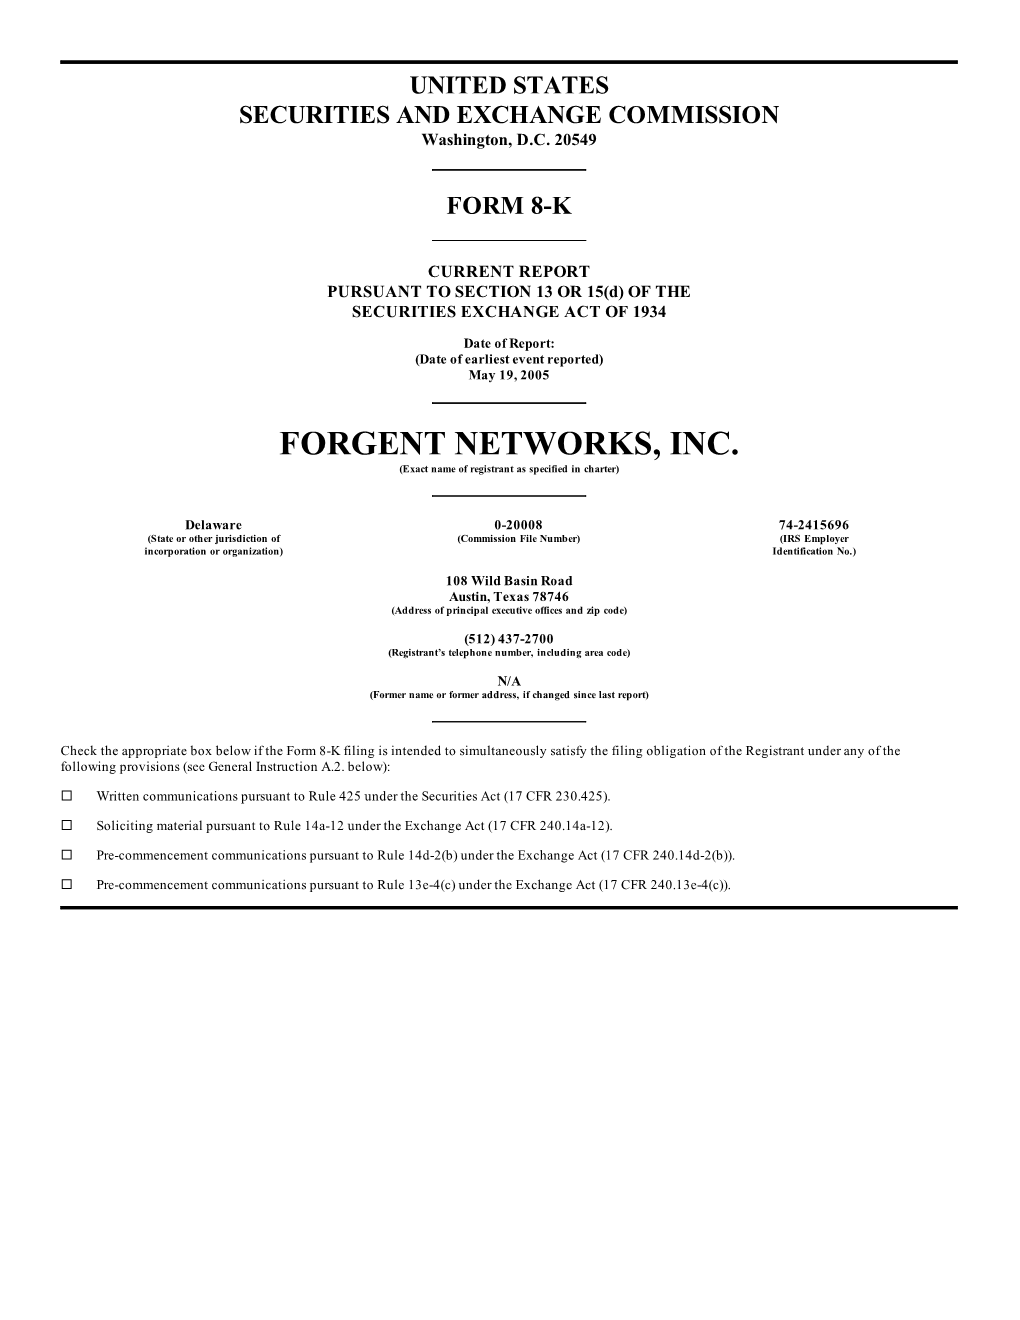 FORGENT NETWORKS, INC. (Exact Name of Registrant As Specified in Charter)